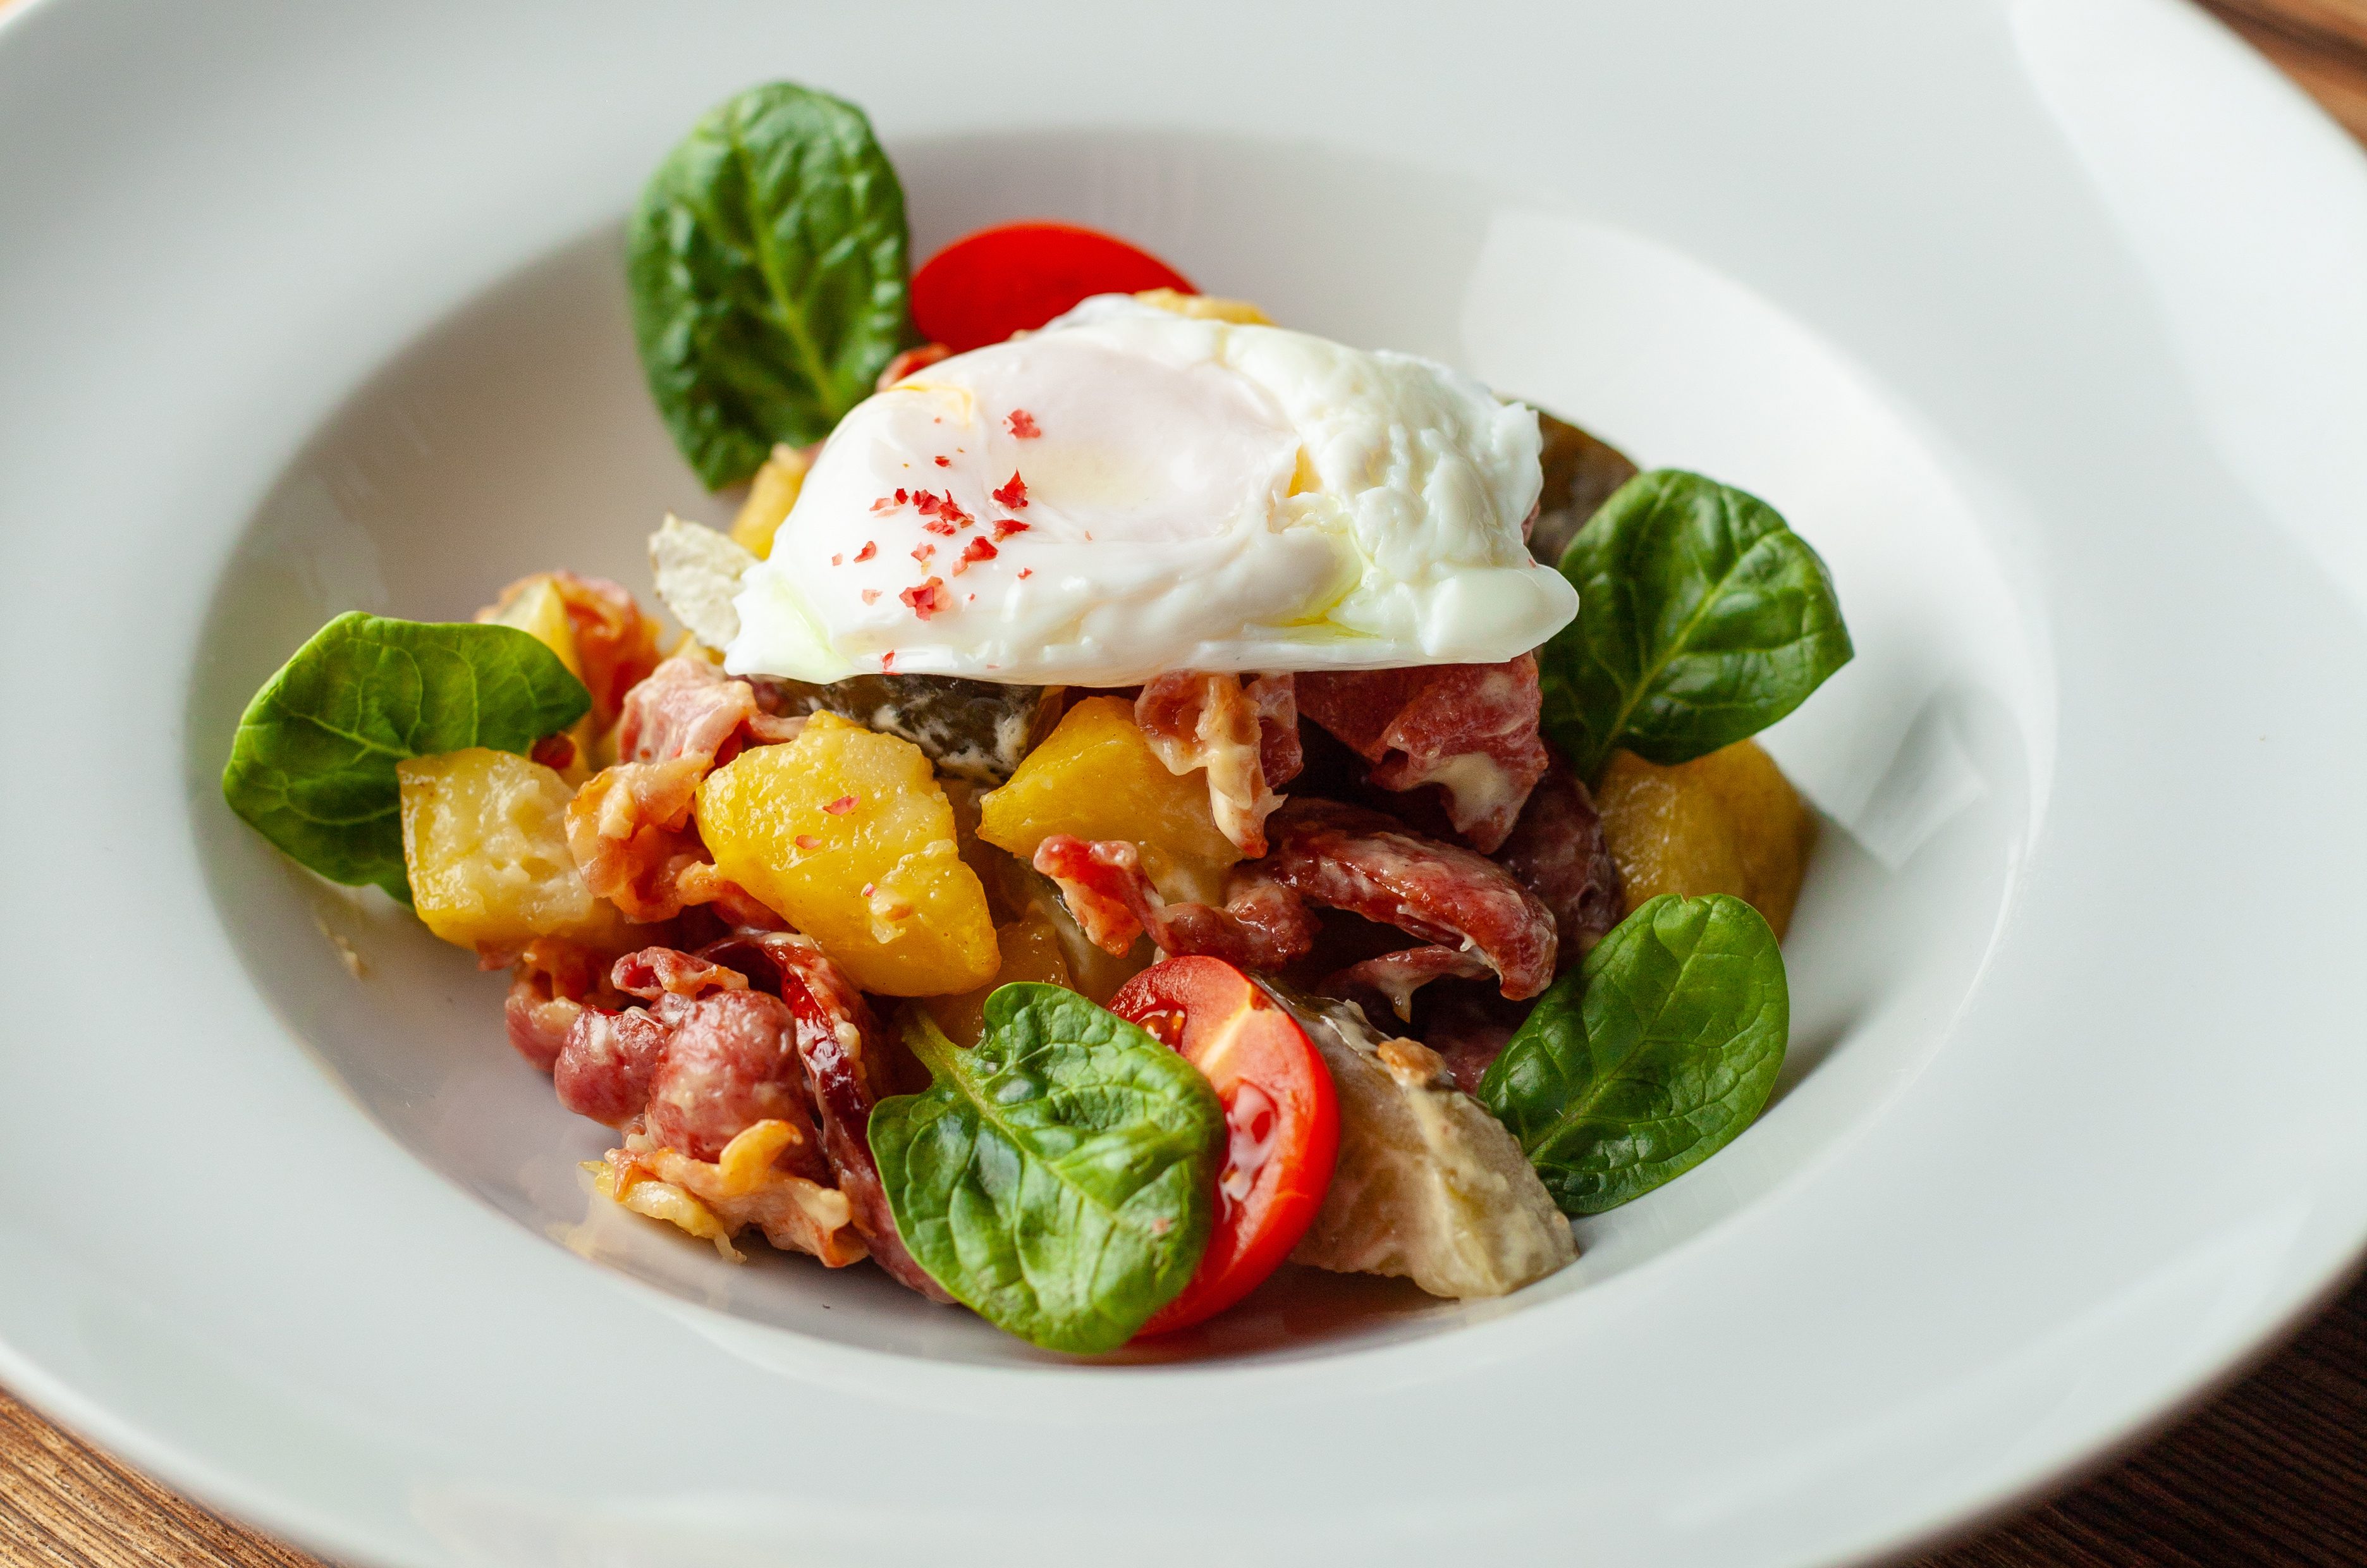 Rustic salad with, tomatoes, chorizo sausage, poached egg, spinach, potato and pickled cucumber for nutritious dinner, served on wooden table, Rustic salad with, tomatoes, chorizo sausage, poached egg, spina